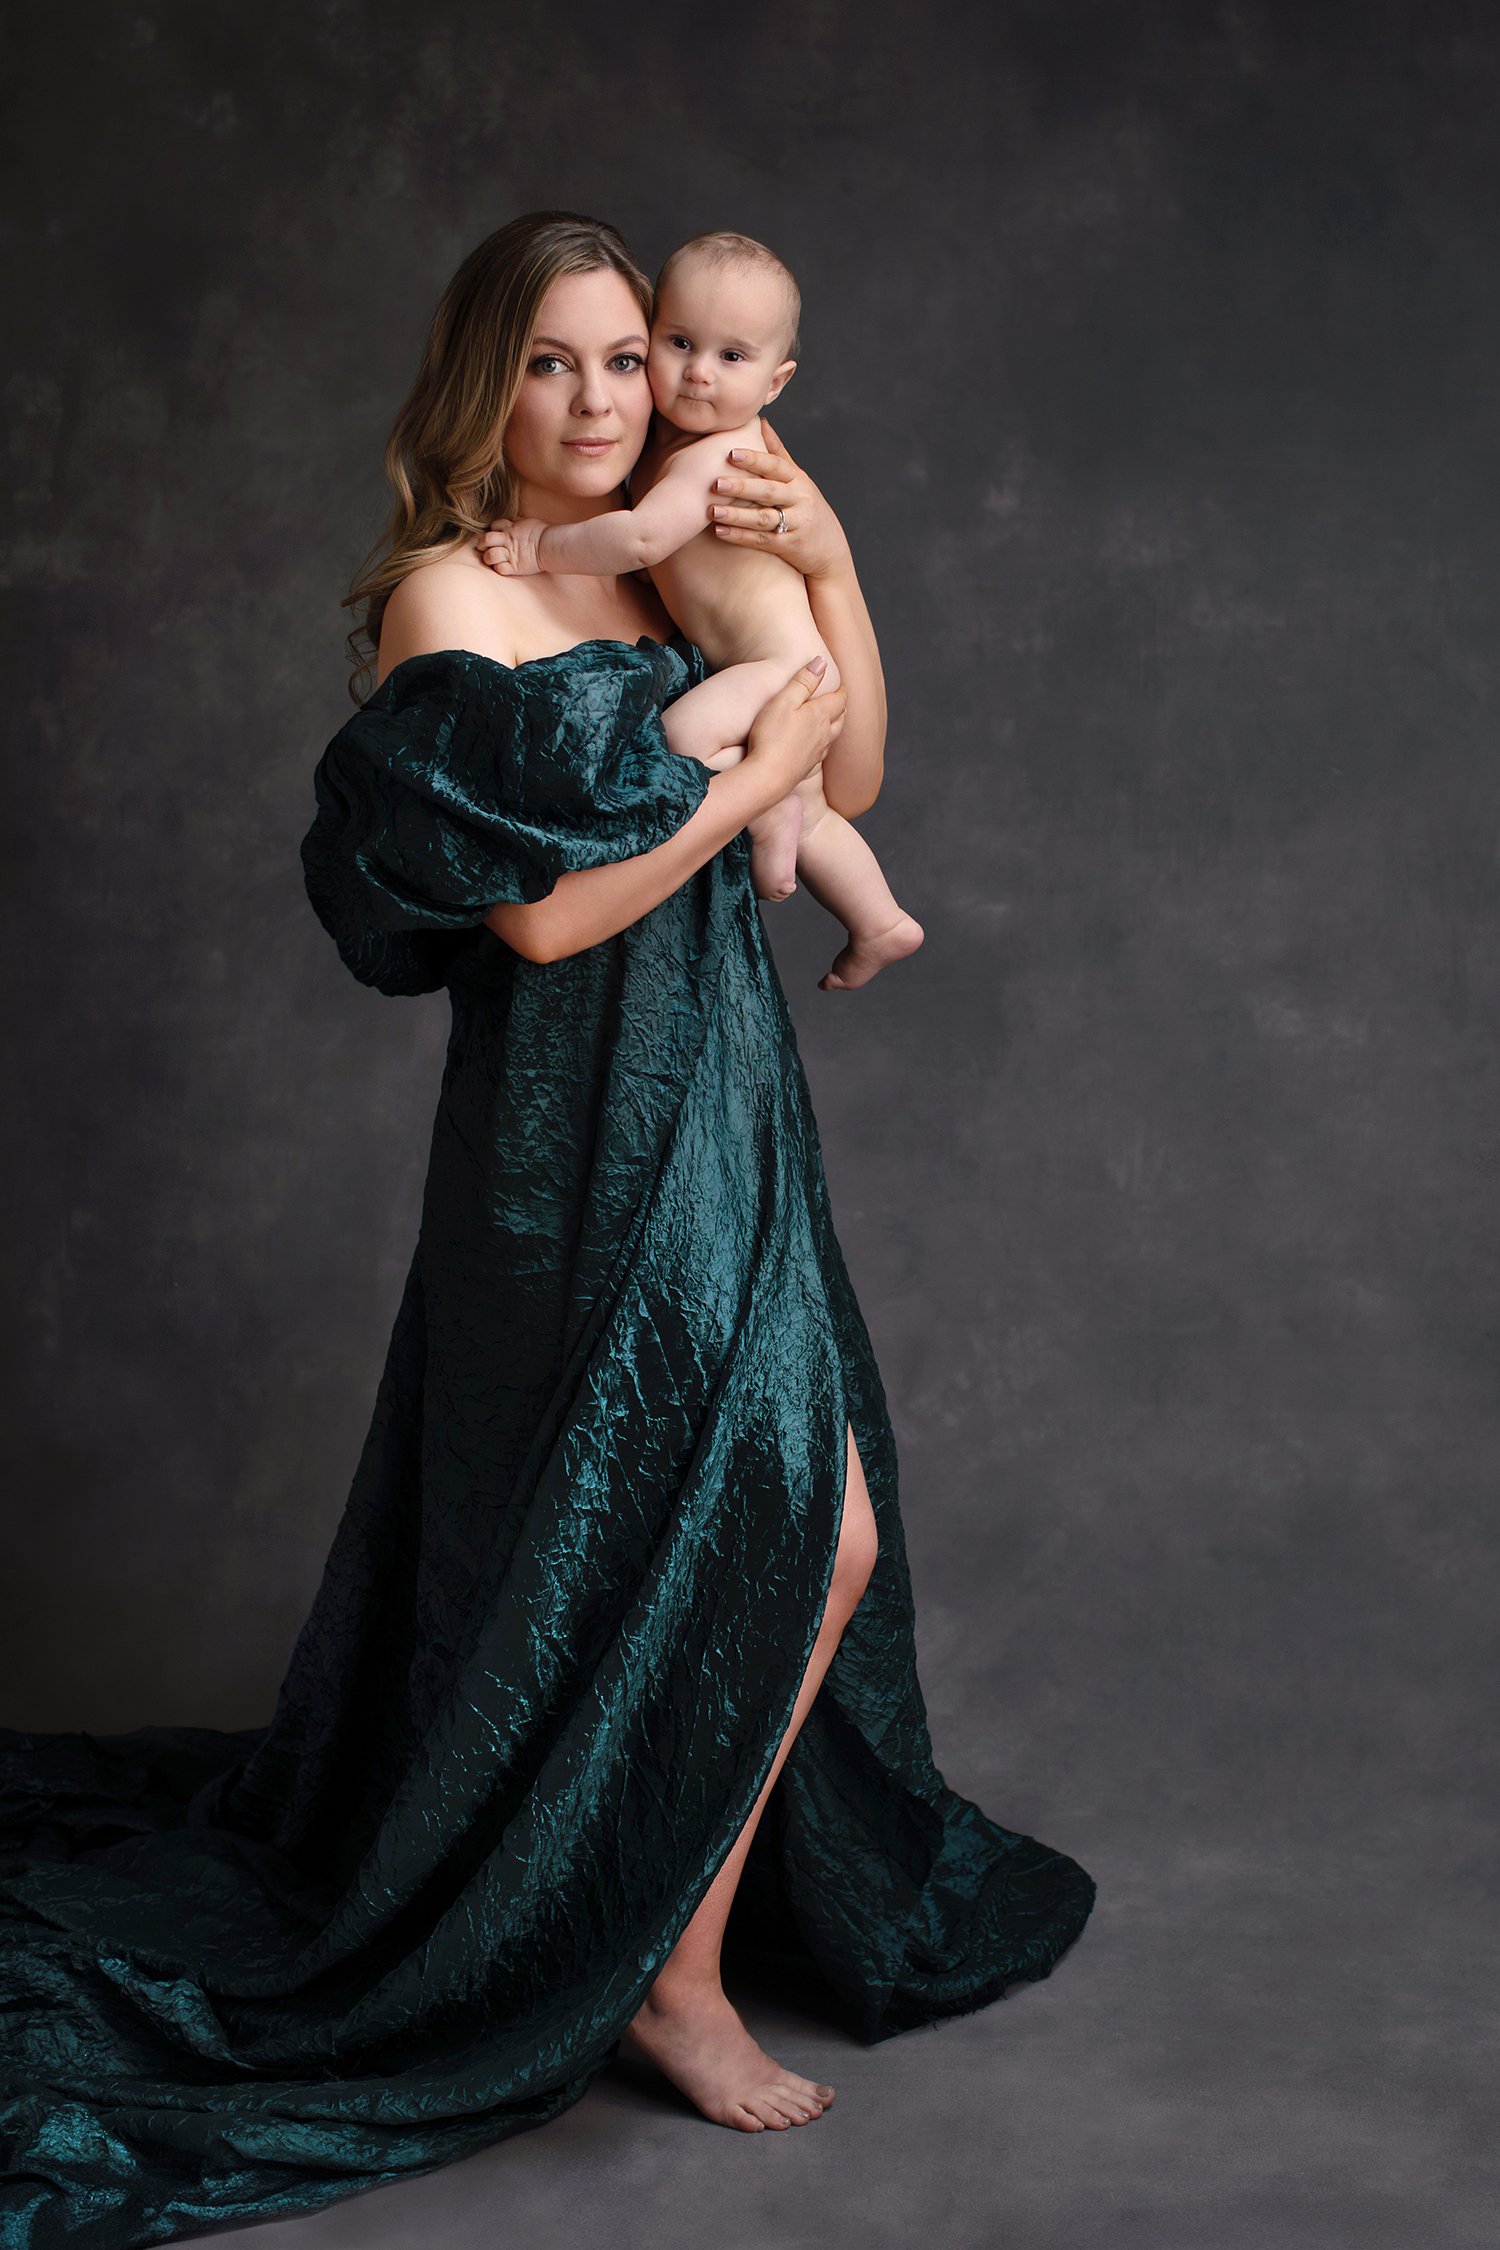 Mom and baby in a relaxed and stylish photoshoot.